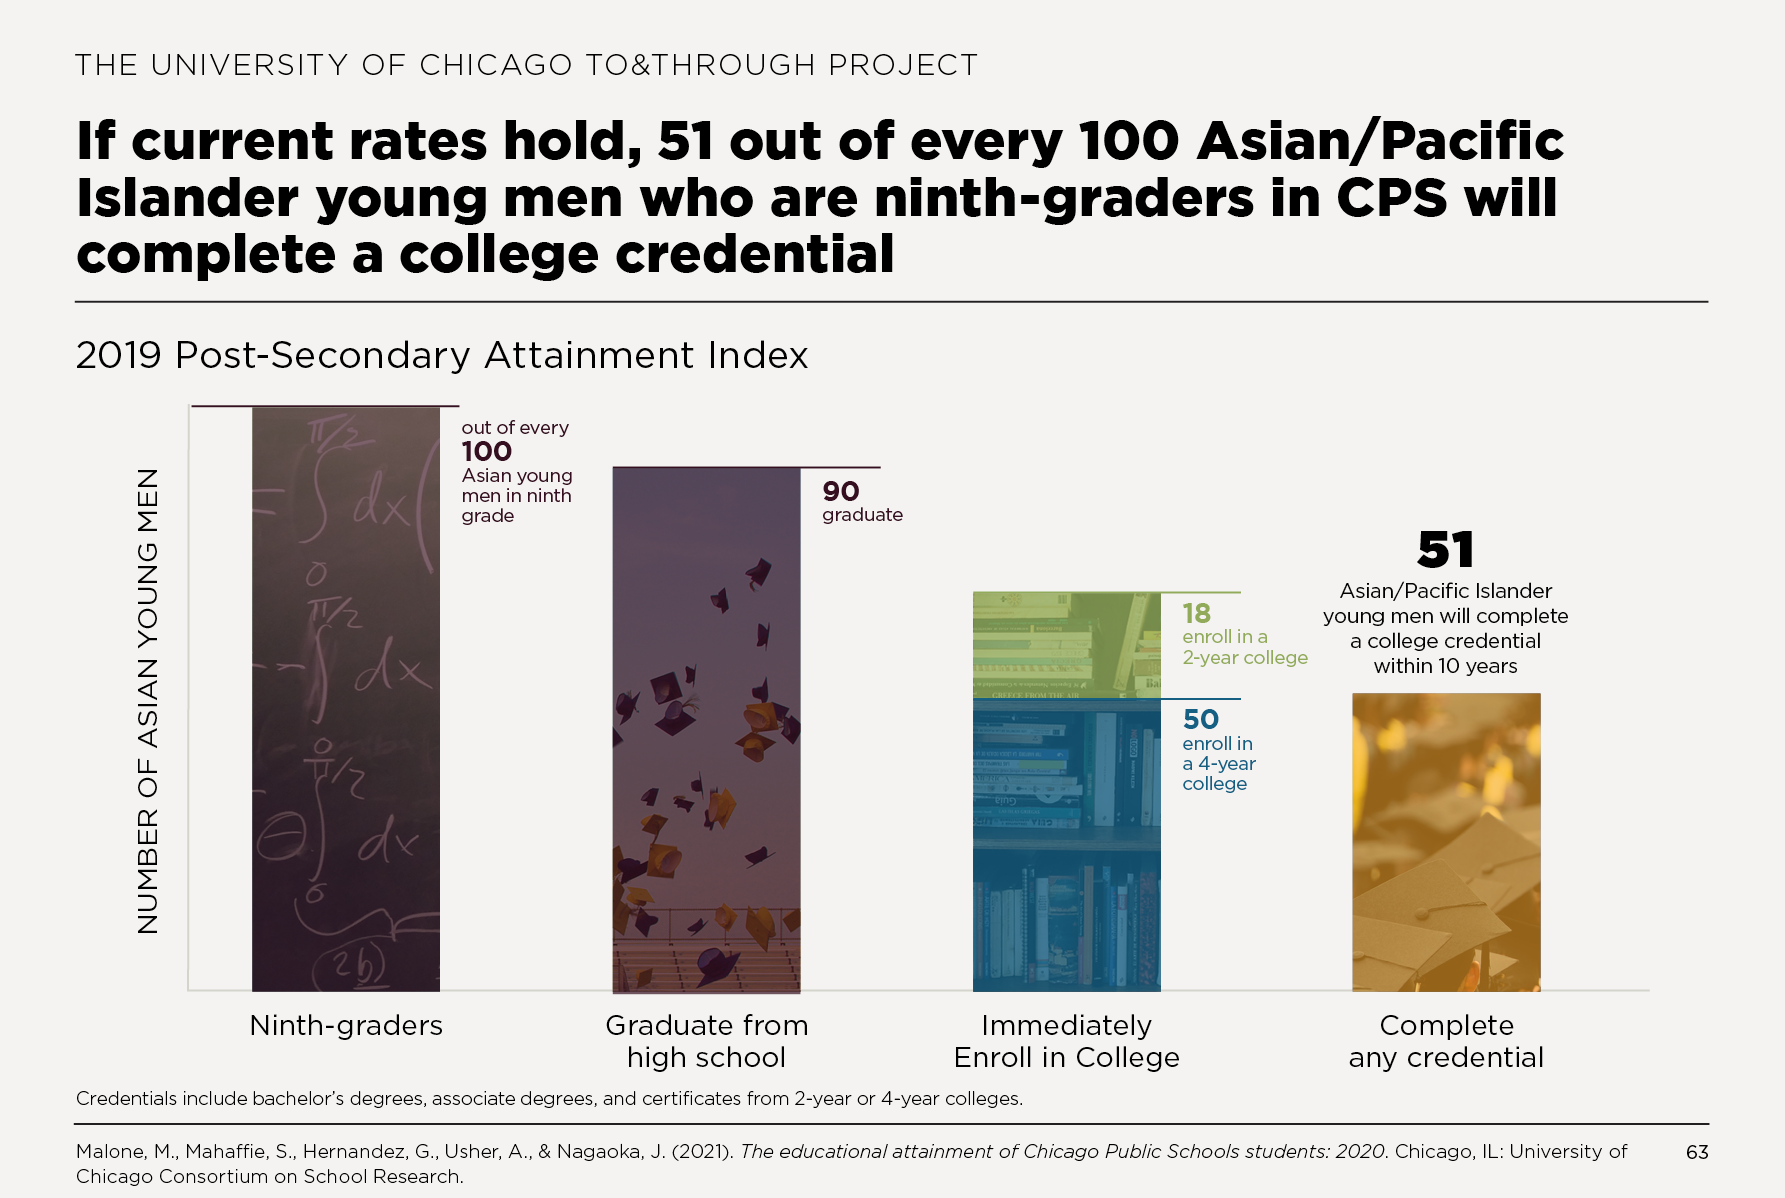 If current rates hold, 51 out of every 100 Asian/Pacific Islander young men who are ninth-graders in CPS will complete a college credential